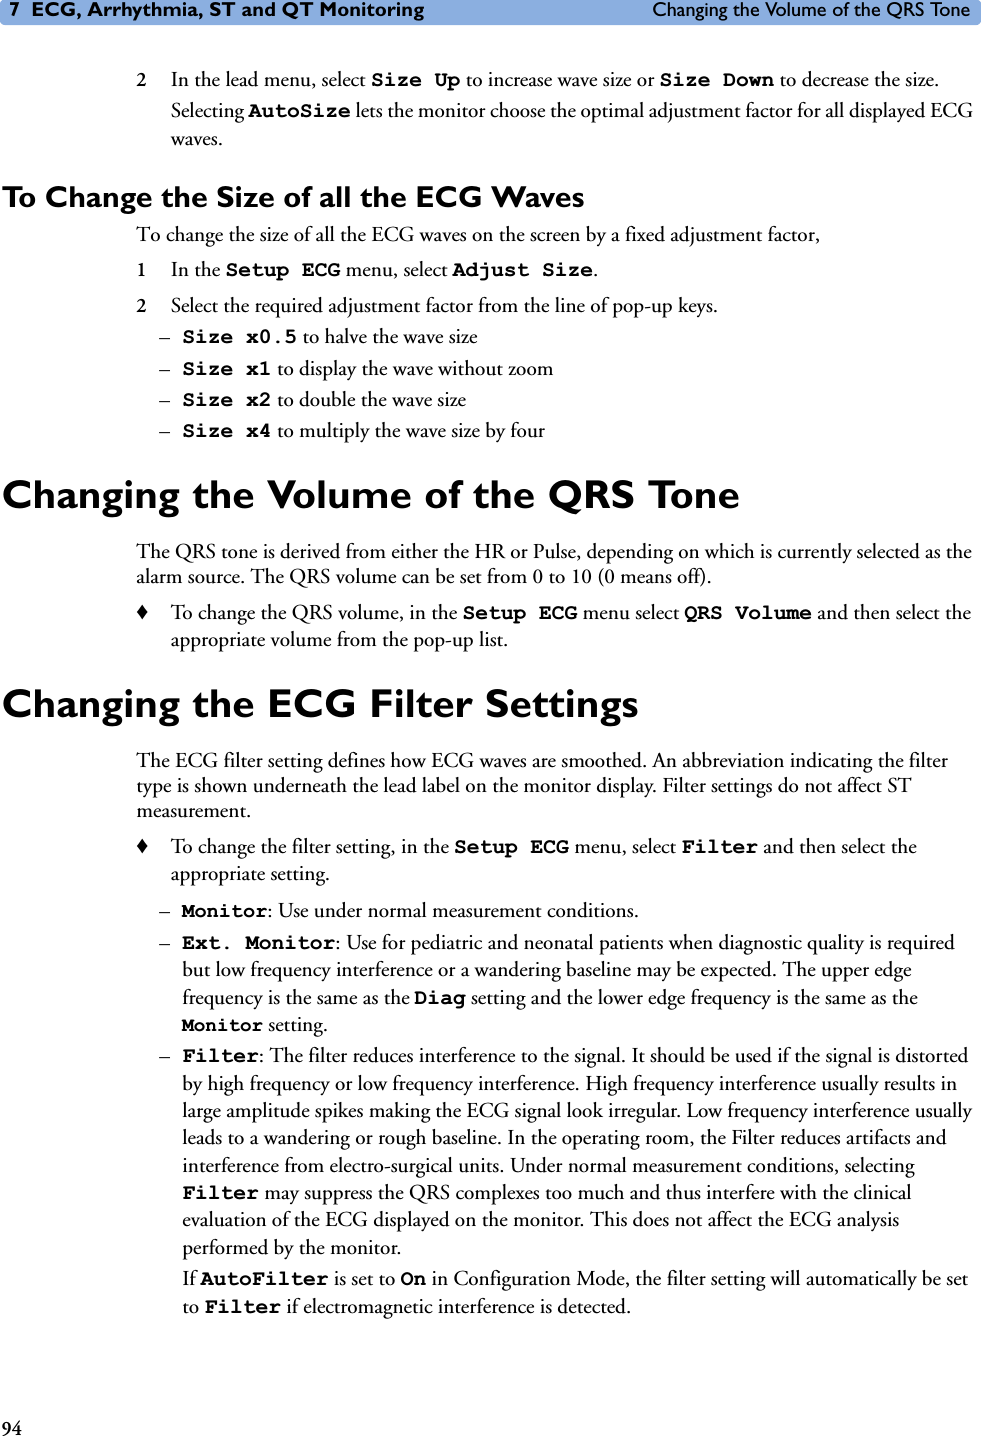 7 ECG, Arrhythmia, ST and QT Monitoring Changing the Volume of the QRS Tone942In the lead menu, select Size Up to increase wave size or Size Down to decrease the size.Selecting AutoSize lets the monitor choose the optimal adjustment factor for all displayed ECG waves.To Change the Size of all the ECG Waves To change the size of all the ECG waves on the screen by a fixed adjustment factor, 1In the Setup ECG menu, select Adjust Size. 2Select the required adjustment factor from the line of pop-up keys. –Size x0.5 to halve the wave size –Size x1 to display the wave without zoom–Size x2 to double the wave size –Size x4 to multiply the wave size by fourChanging the Volume of the QRS ToneThe QRS tone is derived from either the HR or Pulse, depending on which is currently selected as the alarm source. The QRS volume can be set from 0 to 10 (0 means off). ♦To change the QRS volume, in the Setup ECG menu select QRS Volume and then select the appropriate volume from the pop-up list.Changing the ECG Filter SettingsThe ECG filter setting defines how ECG waves are smoothed. An abbreviation indicating the filter type is shown underneath the lead label on the monitor display. Filter settings do not affect ST measurement. ♦To change the filter setting, in the Setup ECG menu, select Filter and then select the appropriate setting. –Monitor: Use under normal measurement conditions.–Ext. Monitor: Use for pediatric and neonatal patients when diagnostic quality is required but low frequency interference or a wandering baseline may be expected. The upper edge frequency is the same as the Diag setting and the lower edge frequency is the same as the Monitor setting. –Filter: The filter reduces interference to the signal. It should be used if the signal is distorted by high frequency or low frequency interference. High frequency interference usually results in large amplitude spikes making the ECG signal look irregular. Low frequency interference usually leads to a wandering or rough baseline. In the operating room, the Filter reduces artifacts and interference from electro-surgical units. Under normal measurement conditions, selecting Filter may suppress the QRS complexes too much and thus interfere with the clinical evaluation of the ECG displayed on the monitor. This does not affect the ECG analysis performed by the monitor. If AutoFilter is set to On in Configuration Mode, the filter setting will automatically be set to Filter if electromagnetic interference is detected.